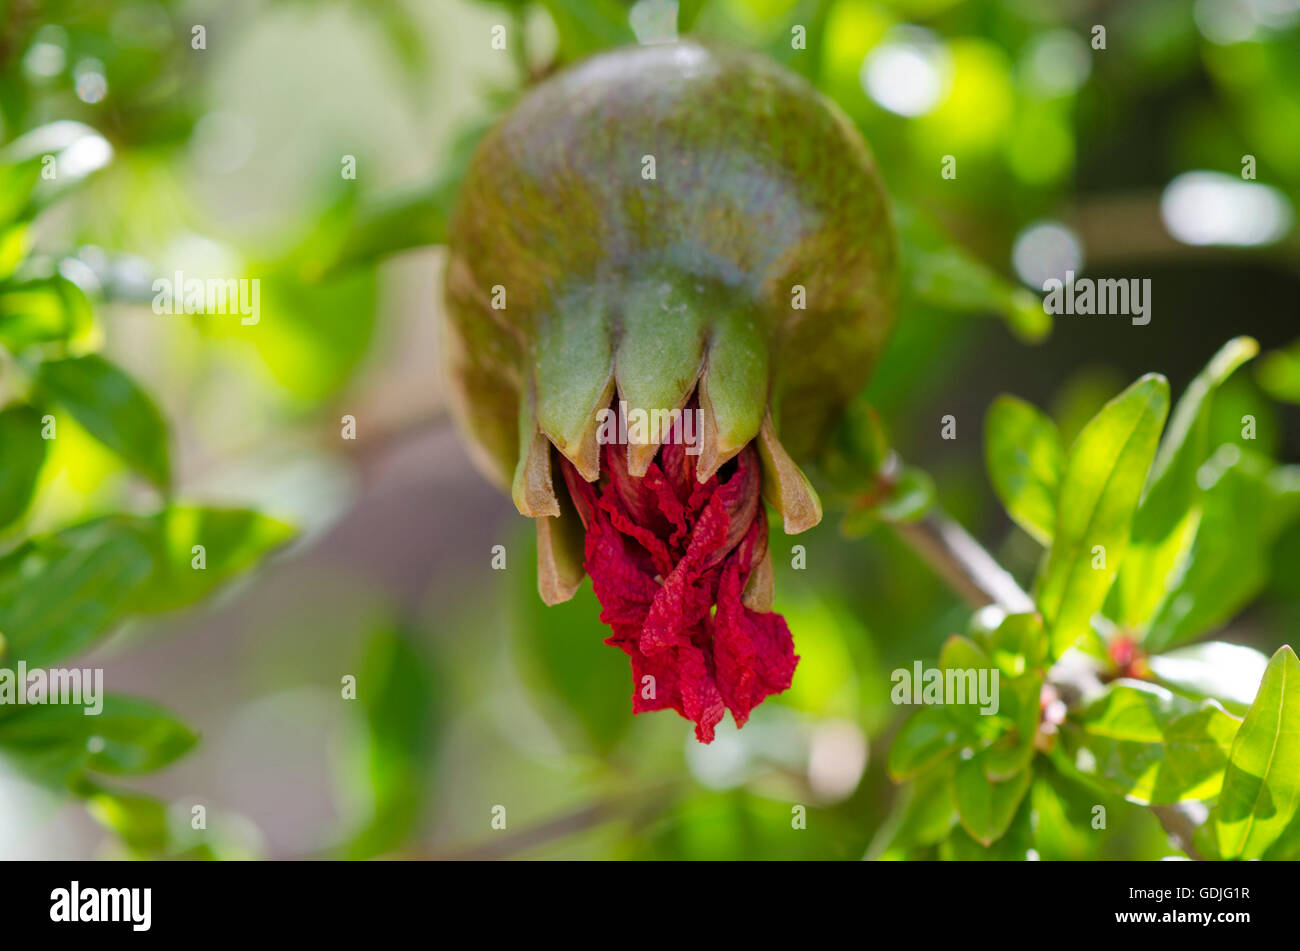 Young pomegranate (Punica granatum) hanging on tree, Andalusia, Spain. Stock Photo